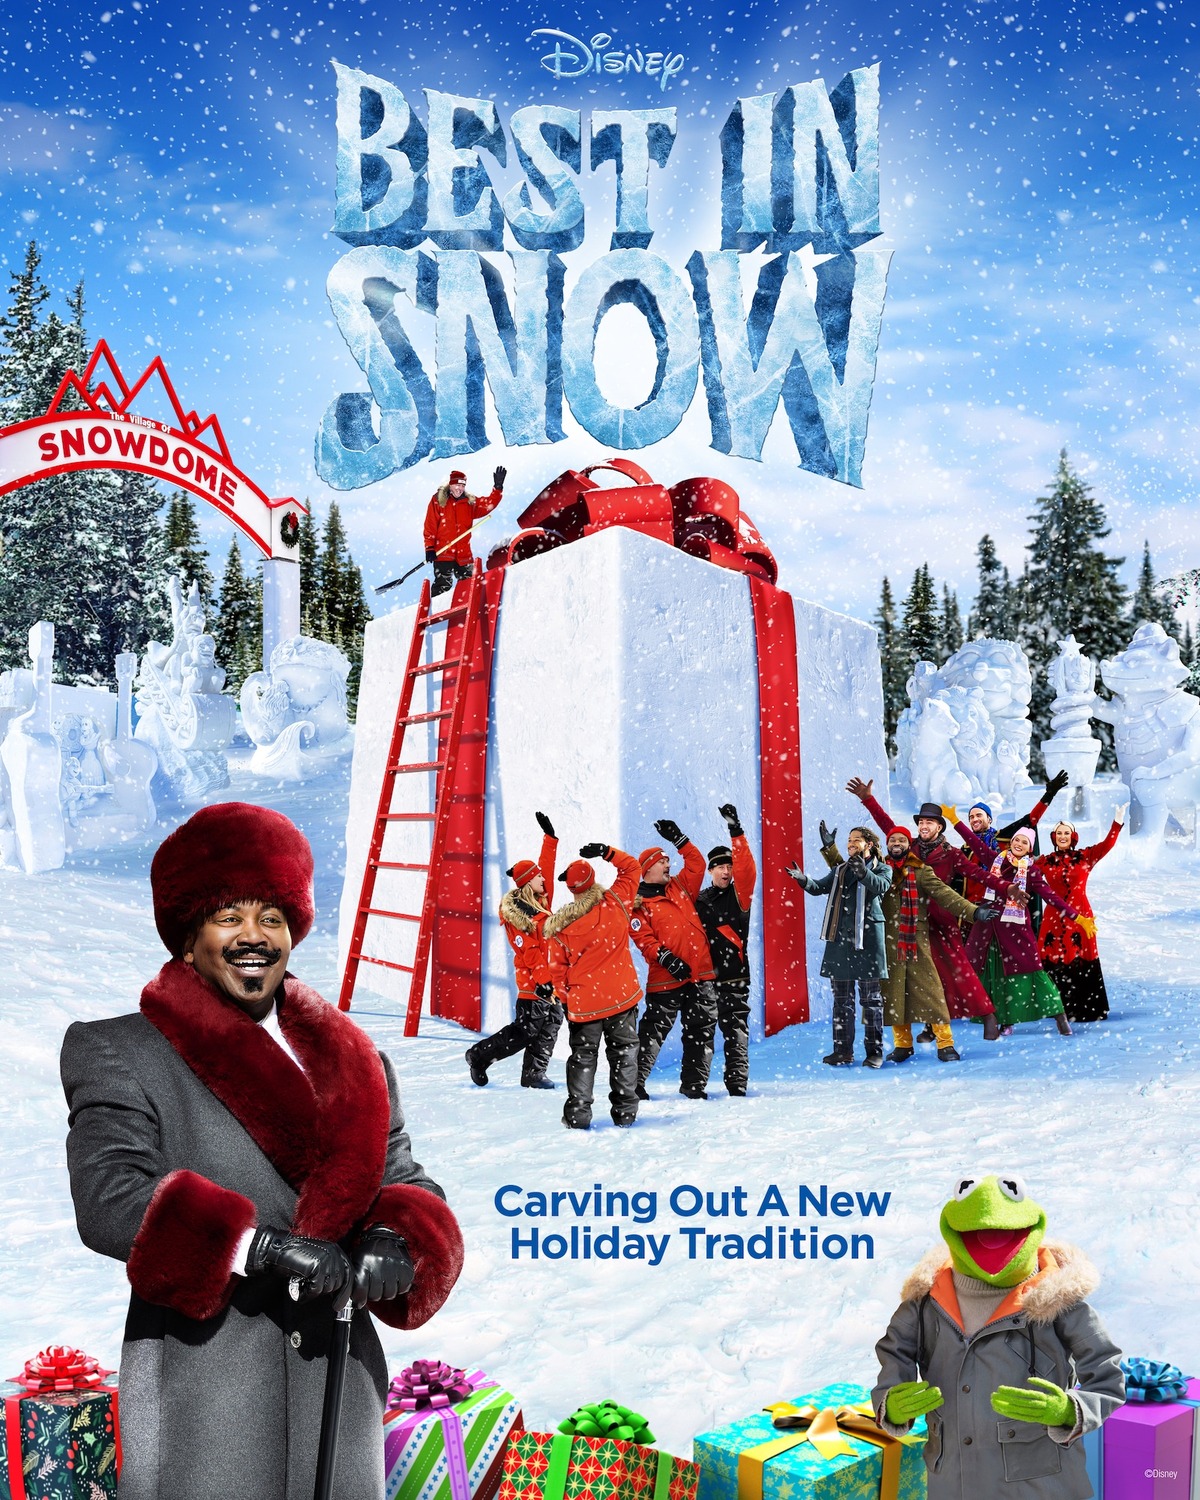 Extra Large TV Poster Image for Best in Snow 